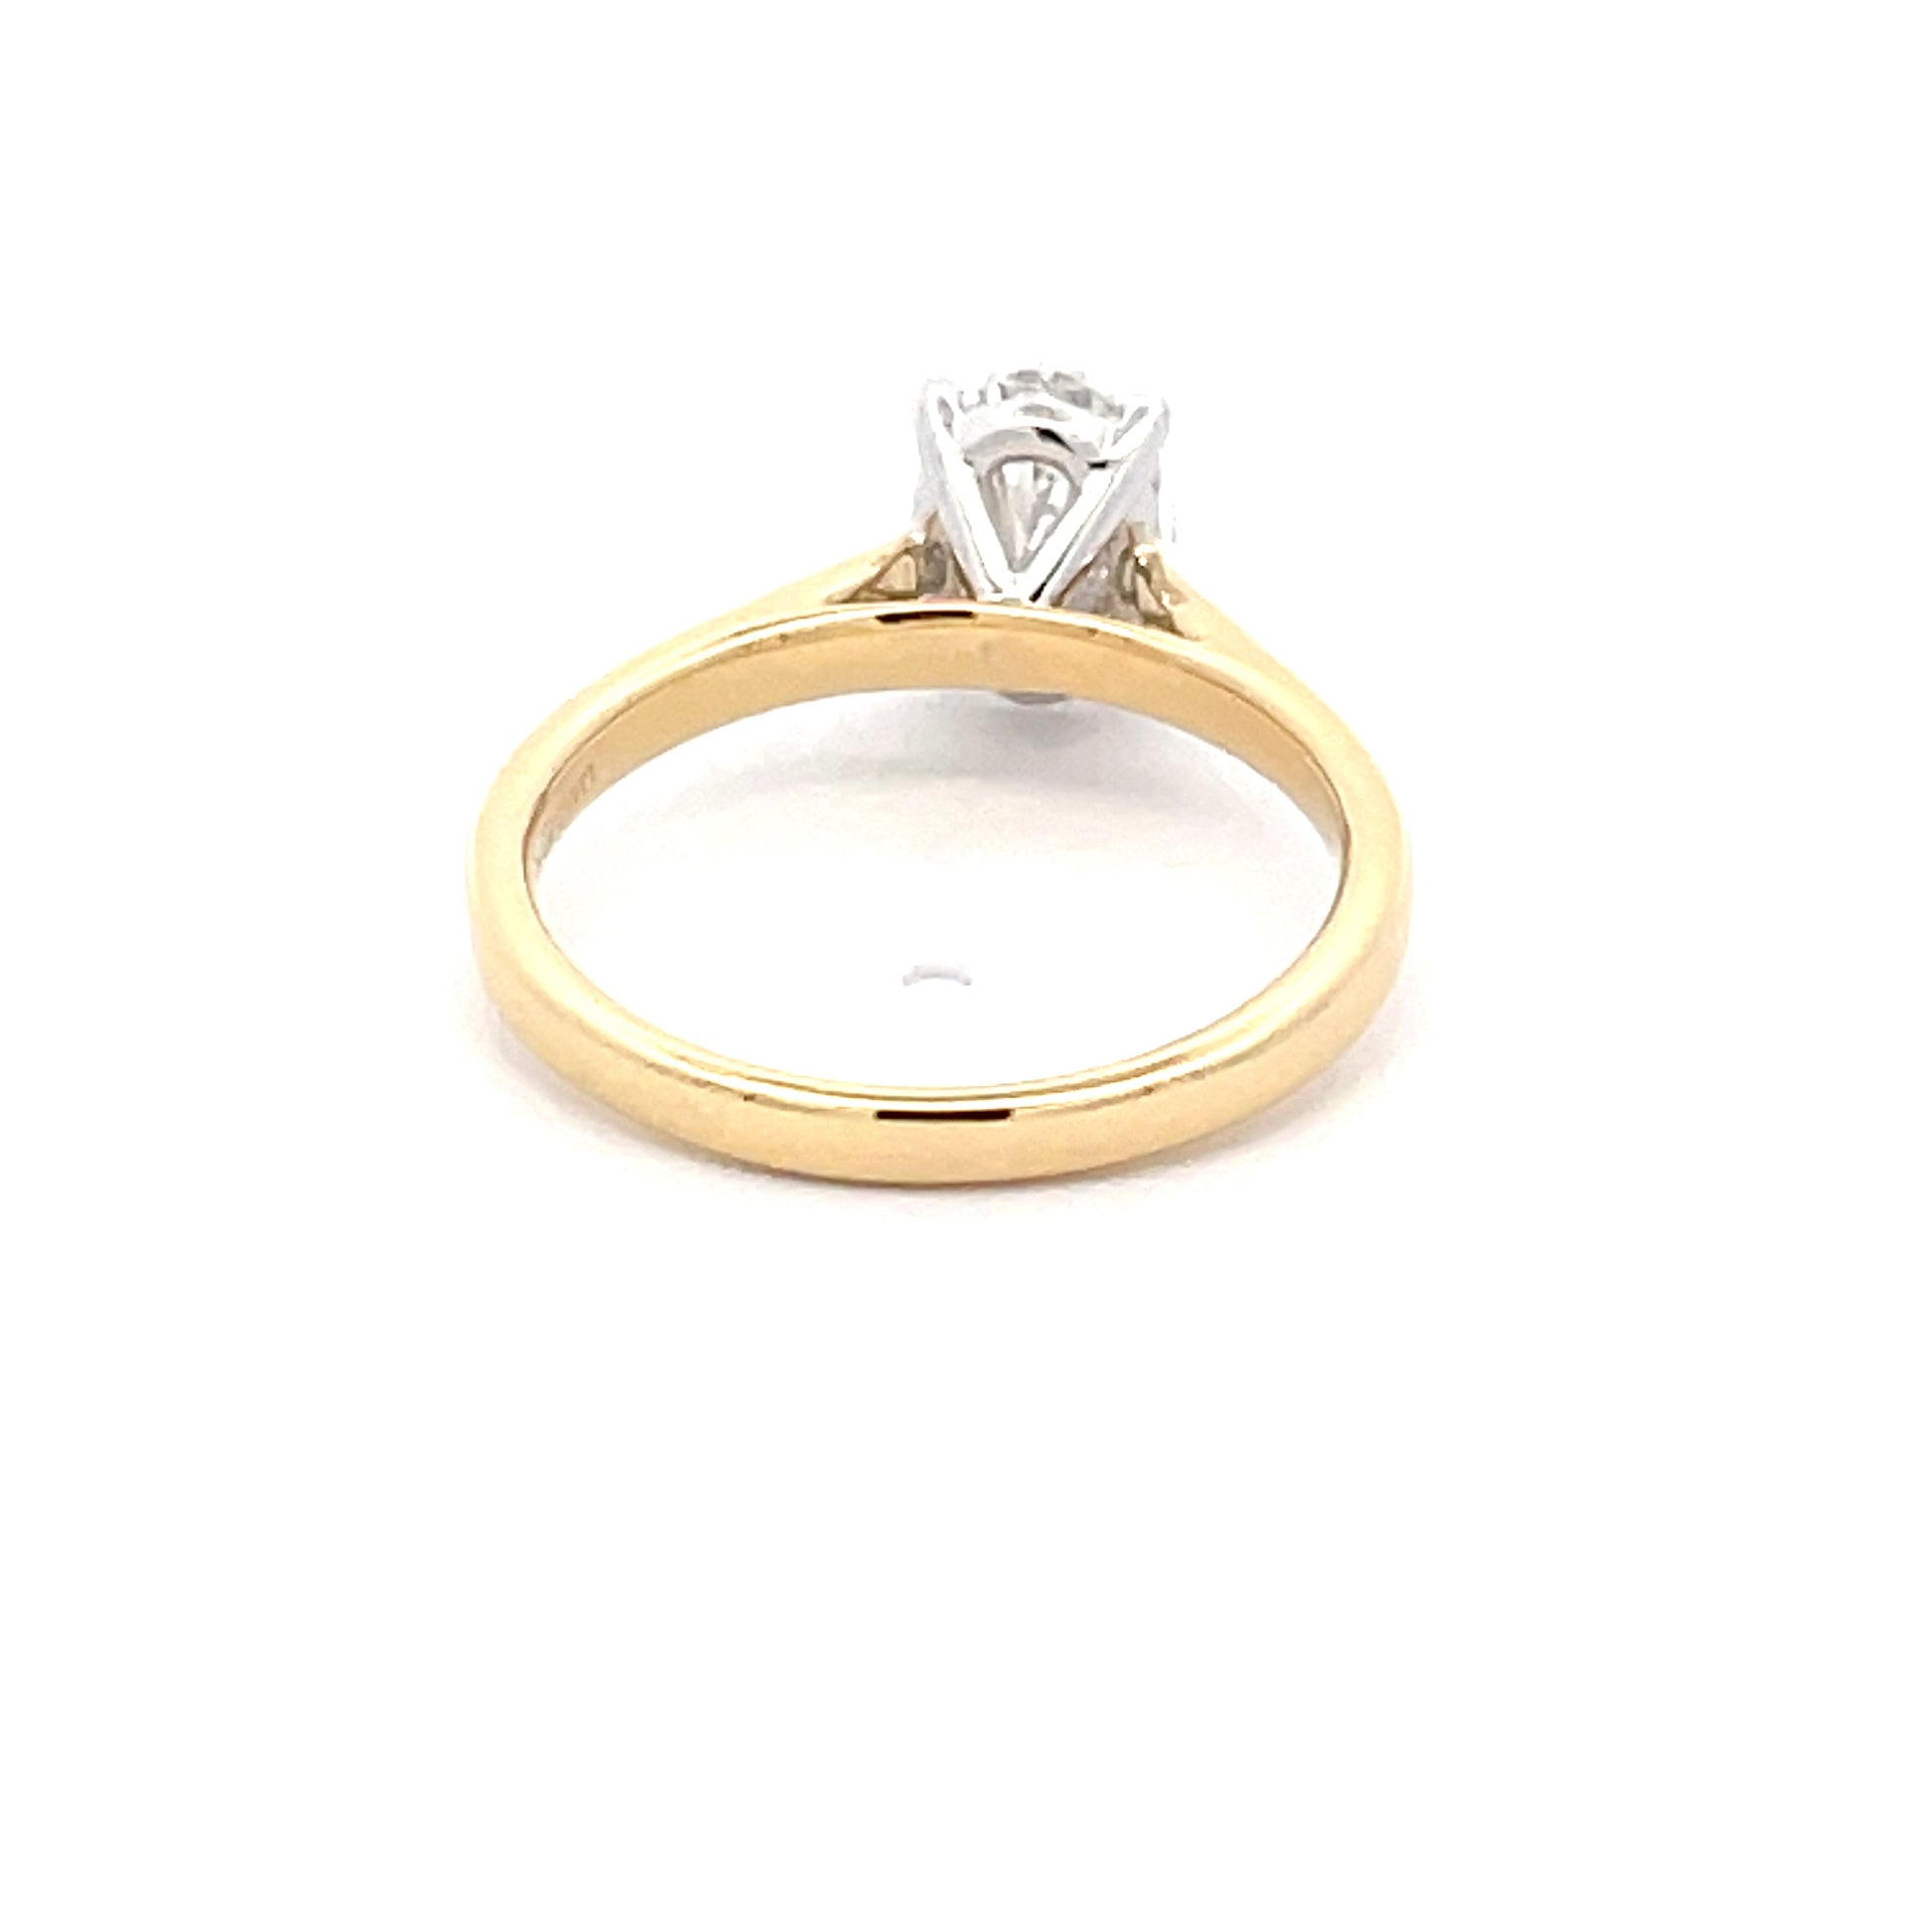 LAB GROWN OVAL SHAPED DIAMOND SOLITAIRE RING - 1.21CTS  Gardiner Brothers   